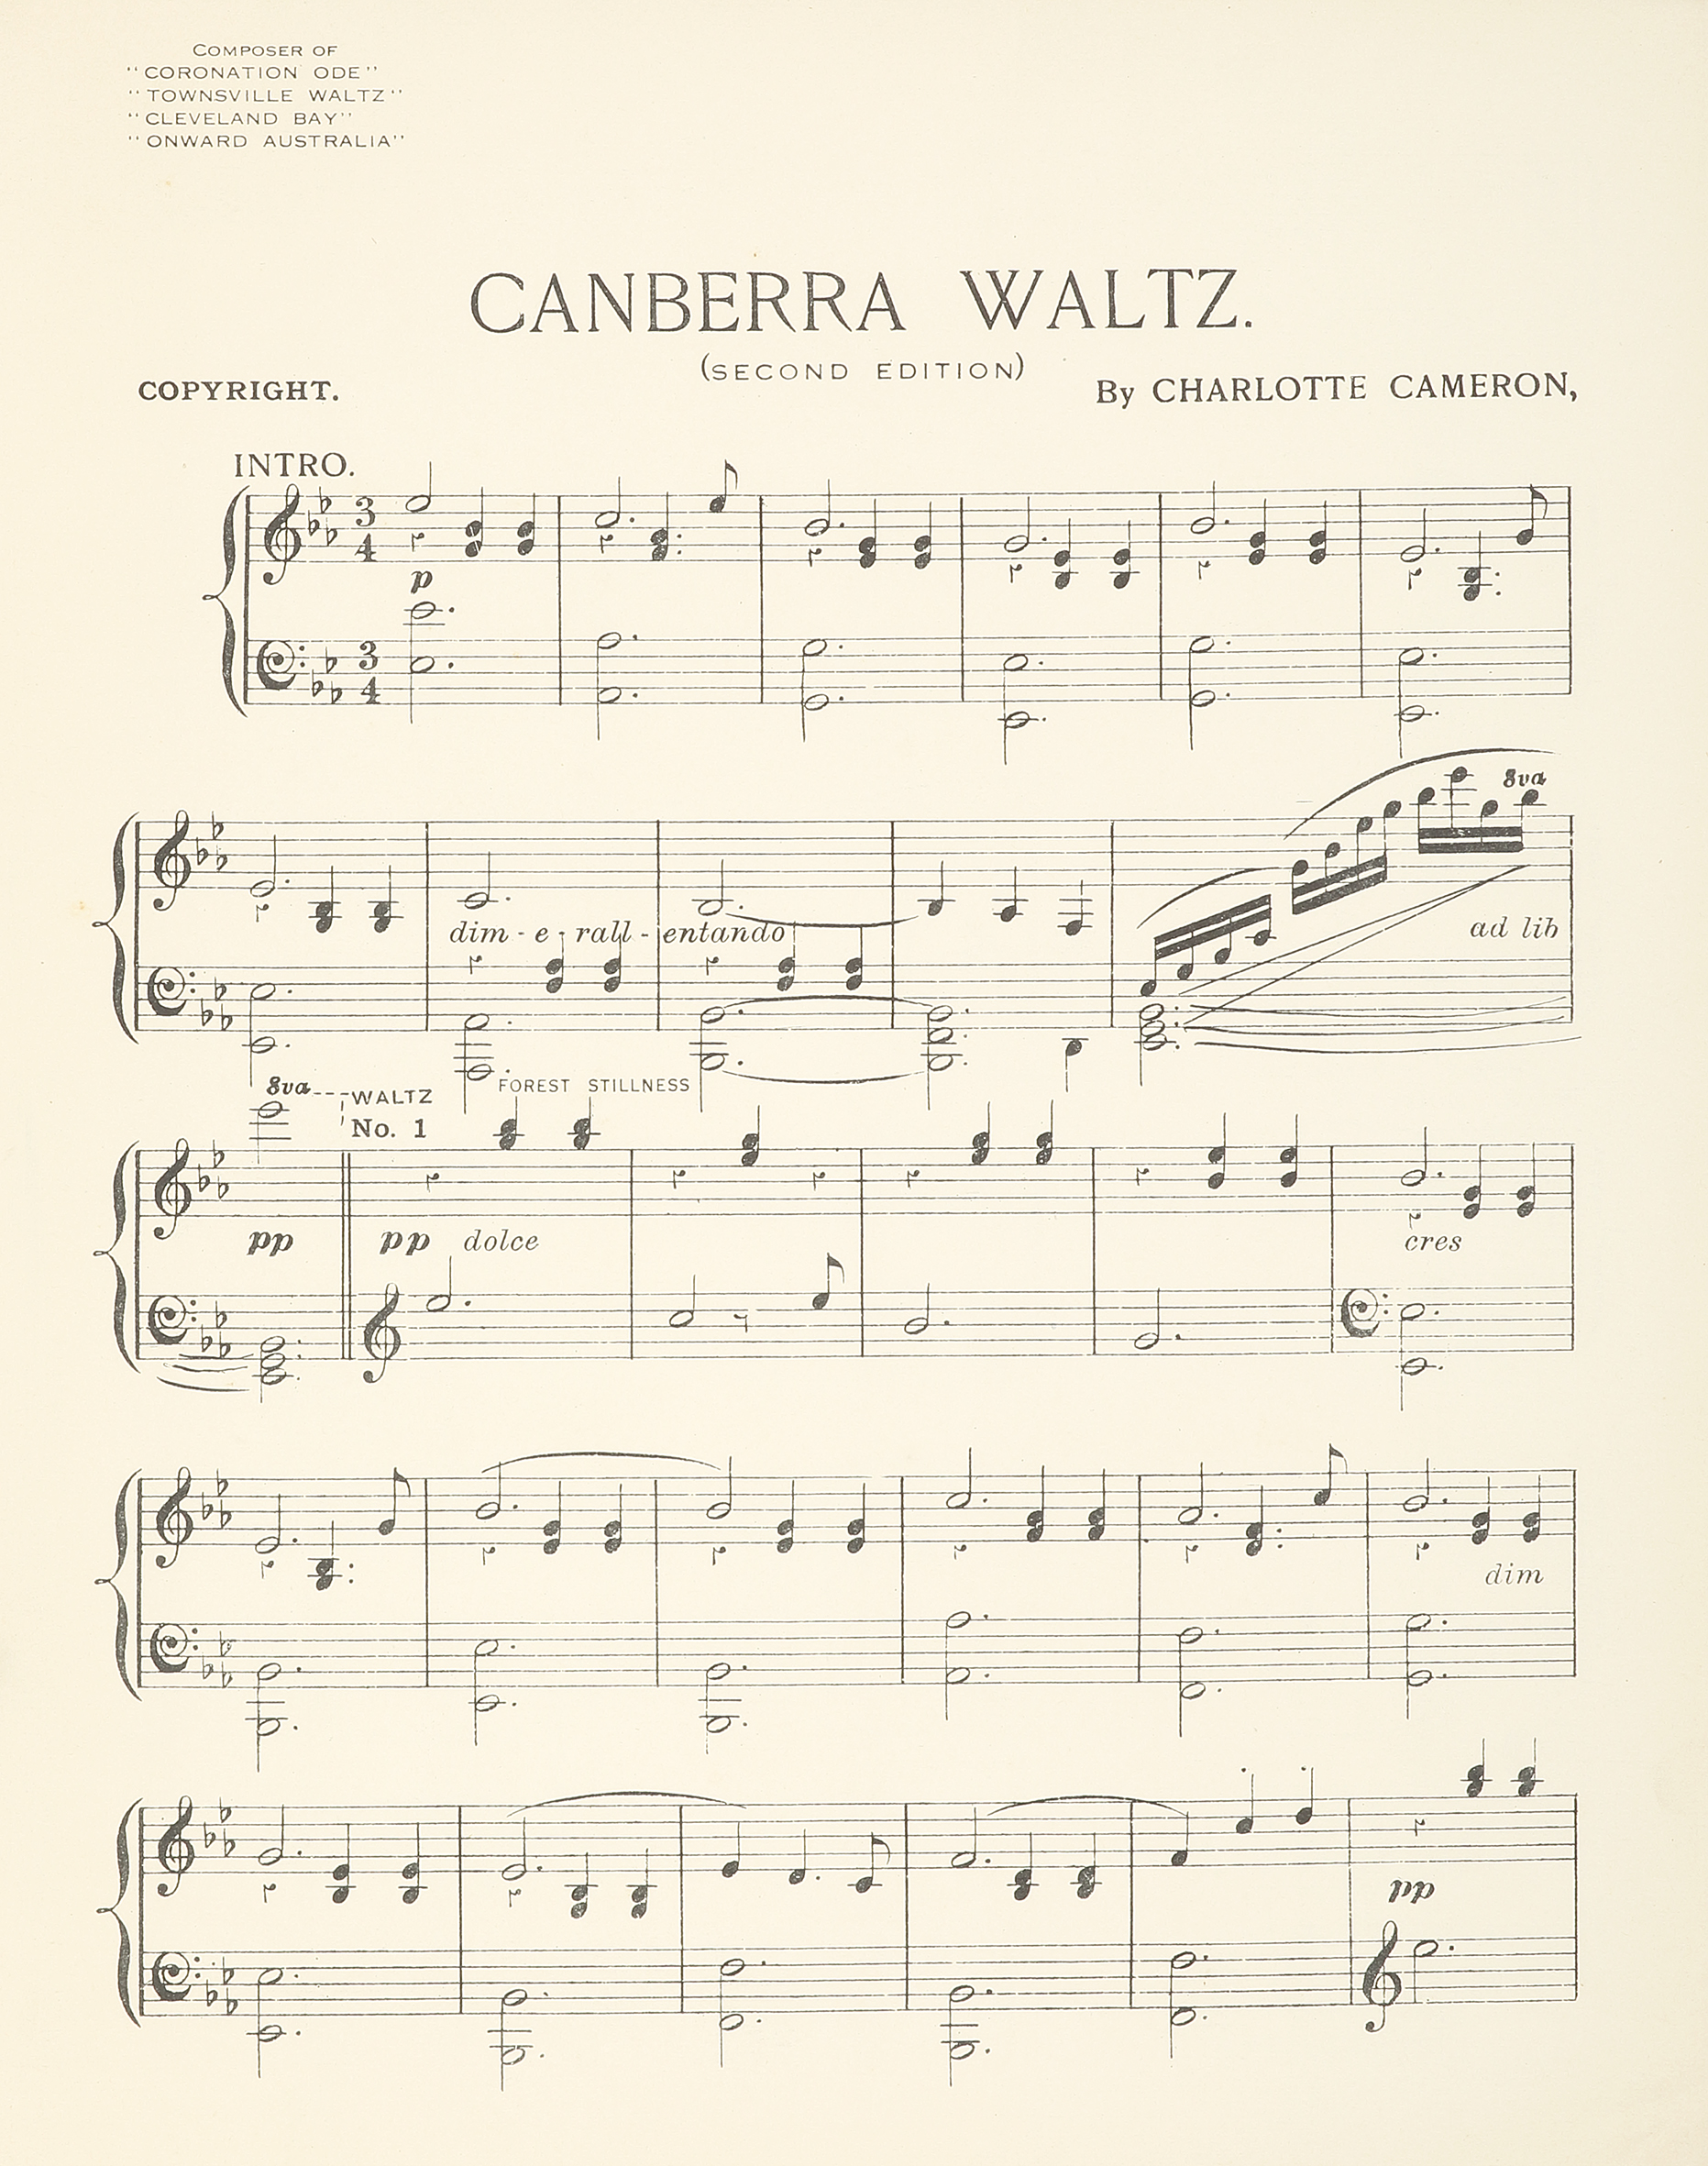 Souvenir 1927 Canberra Waltz by Charlotte Cameron - Vintage Print from 1927